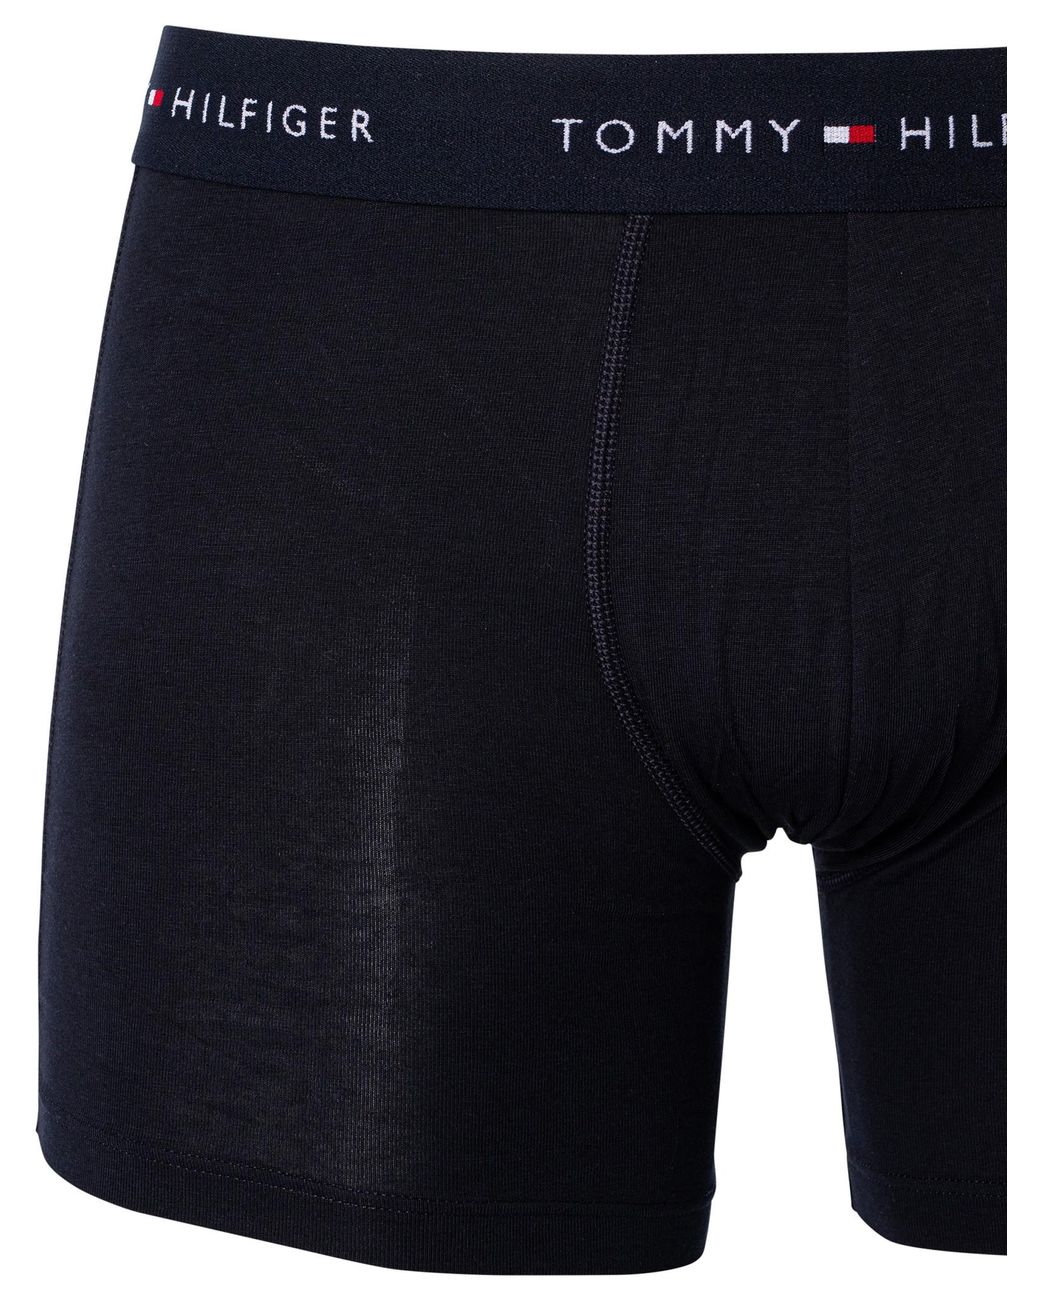 Tommy Hilfiger 3 Pack Signature Cotton Essential Boxer Briefs in